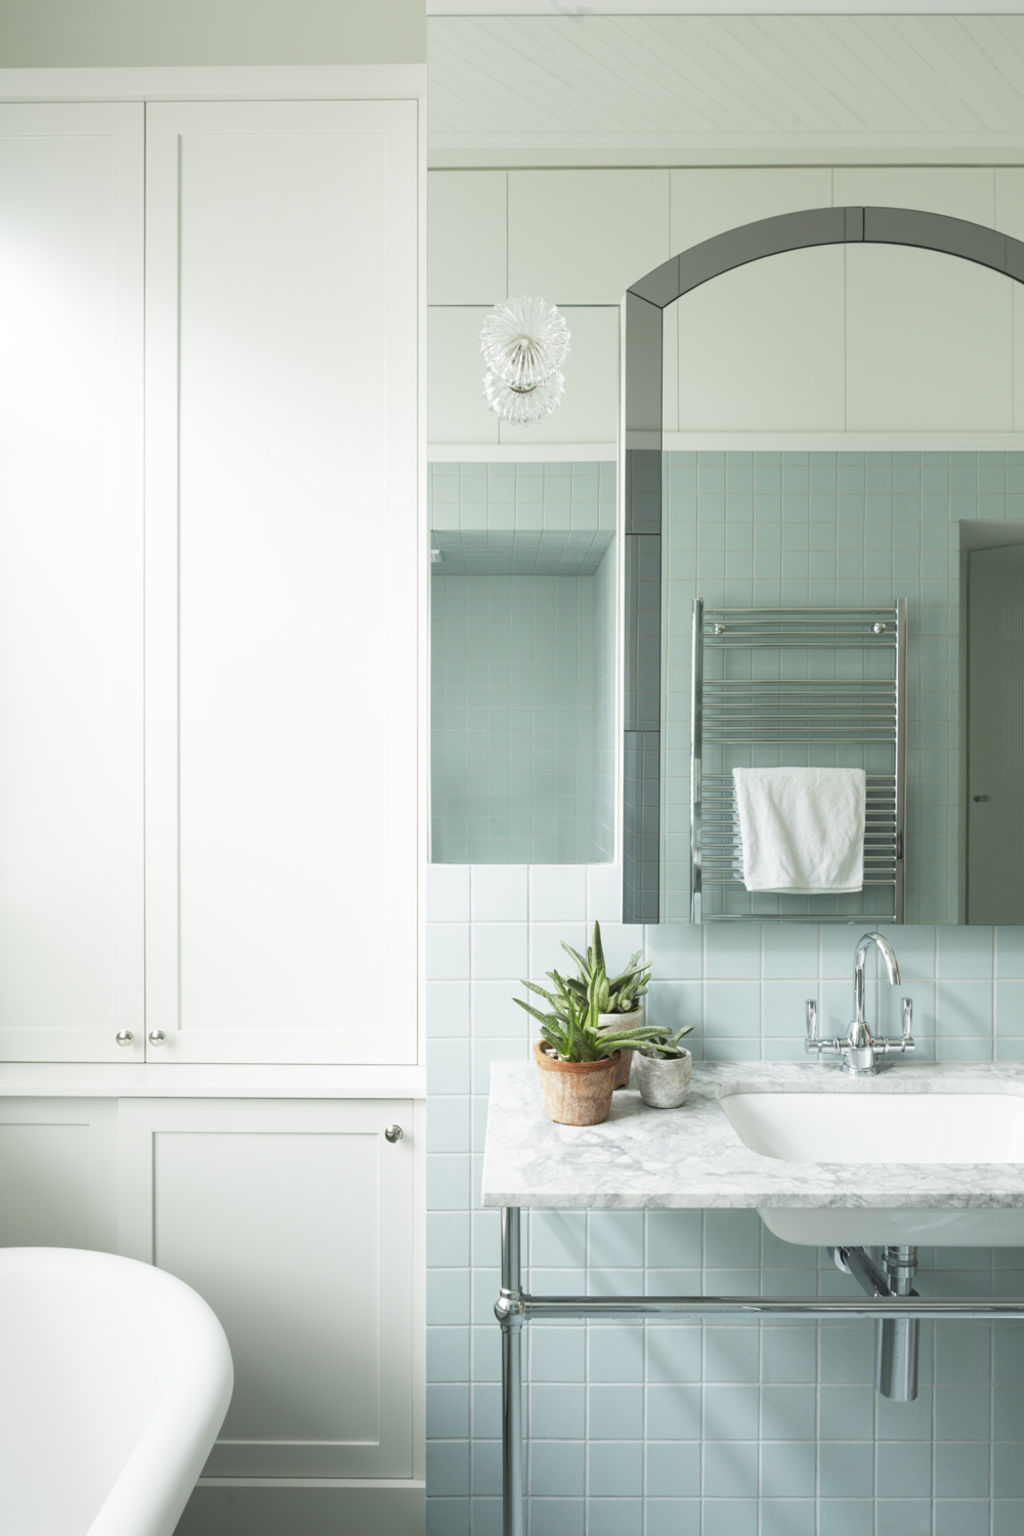 interior designer Meredith Lee favours a cool palette of blues and greens for small spaces. Photo: Elizabeth Schiavello